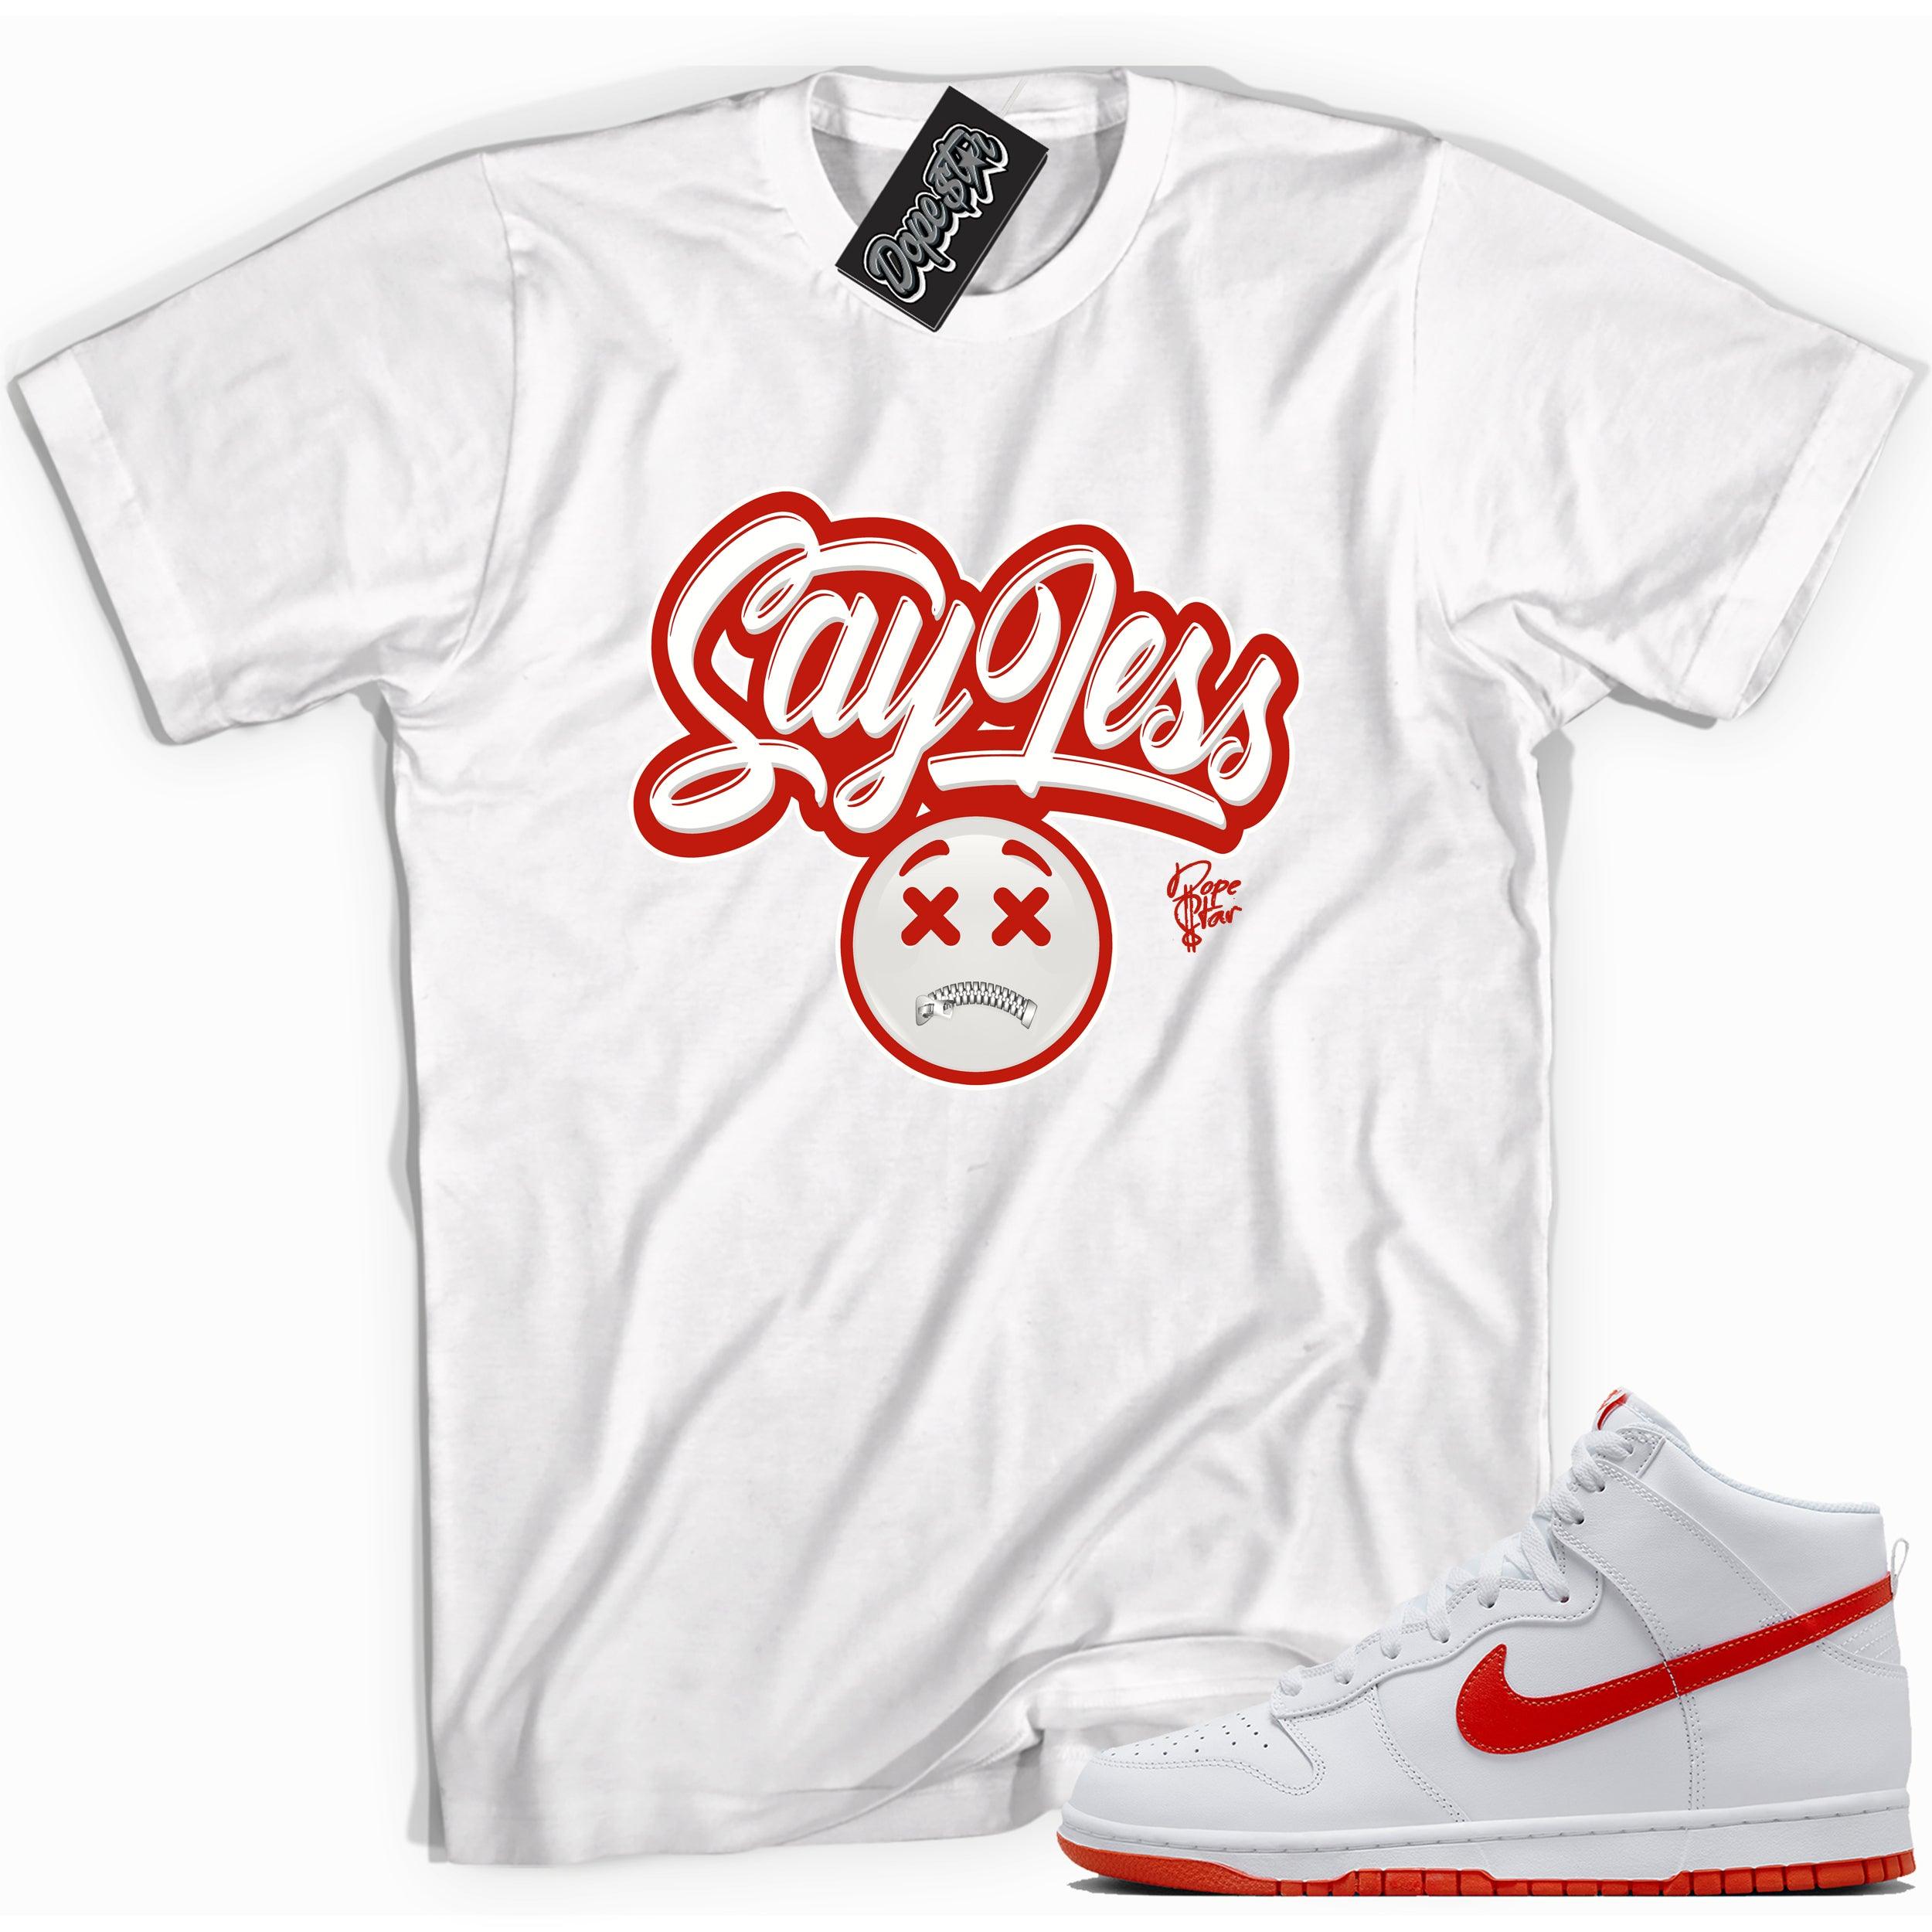 Cool white graphic tee with 'say less' print, that perfectly matches Nike Dunk High White Picante Red sneakers.